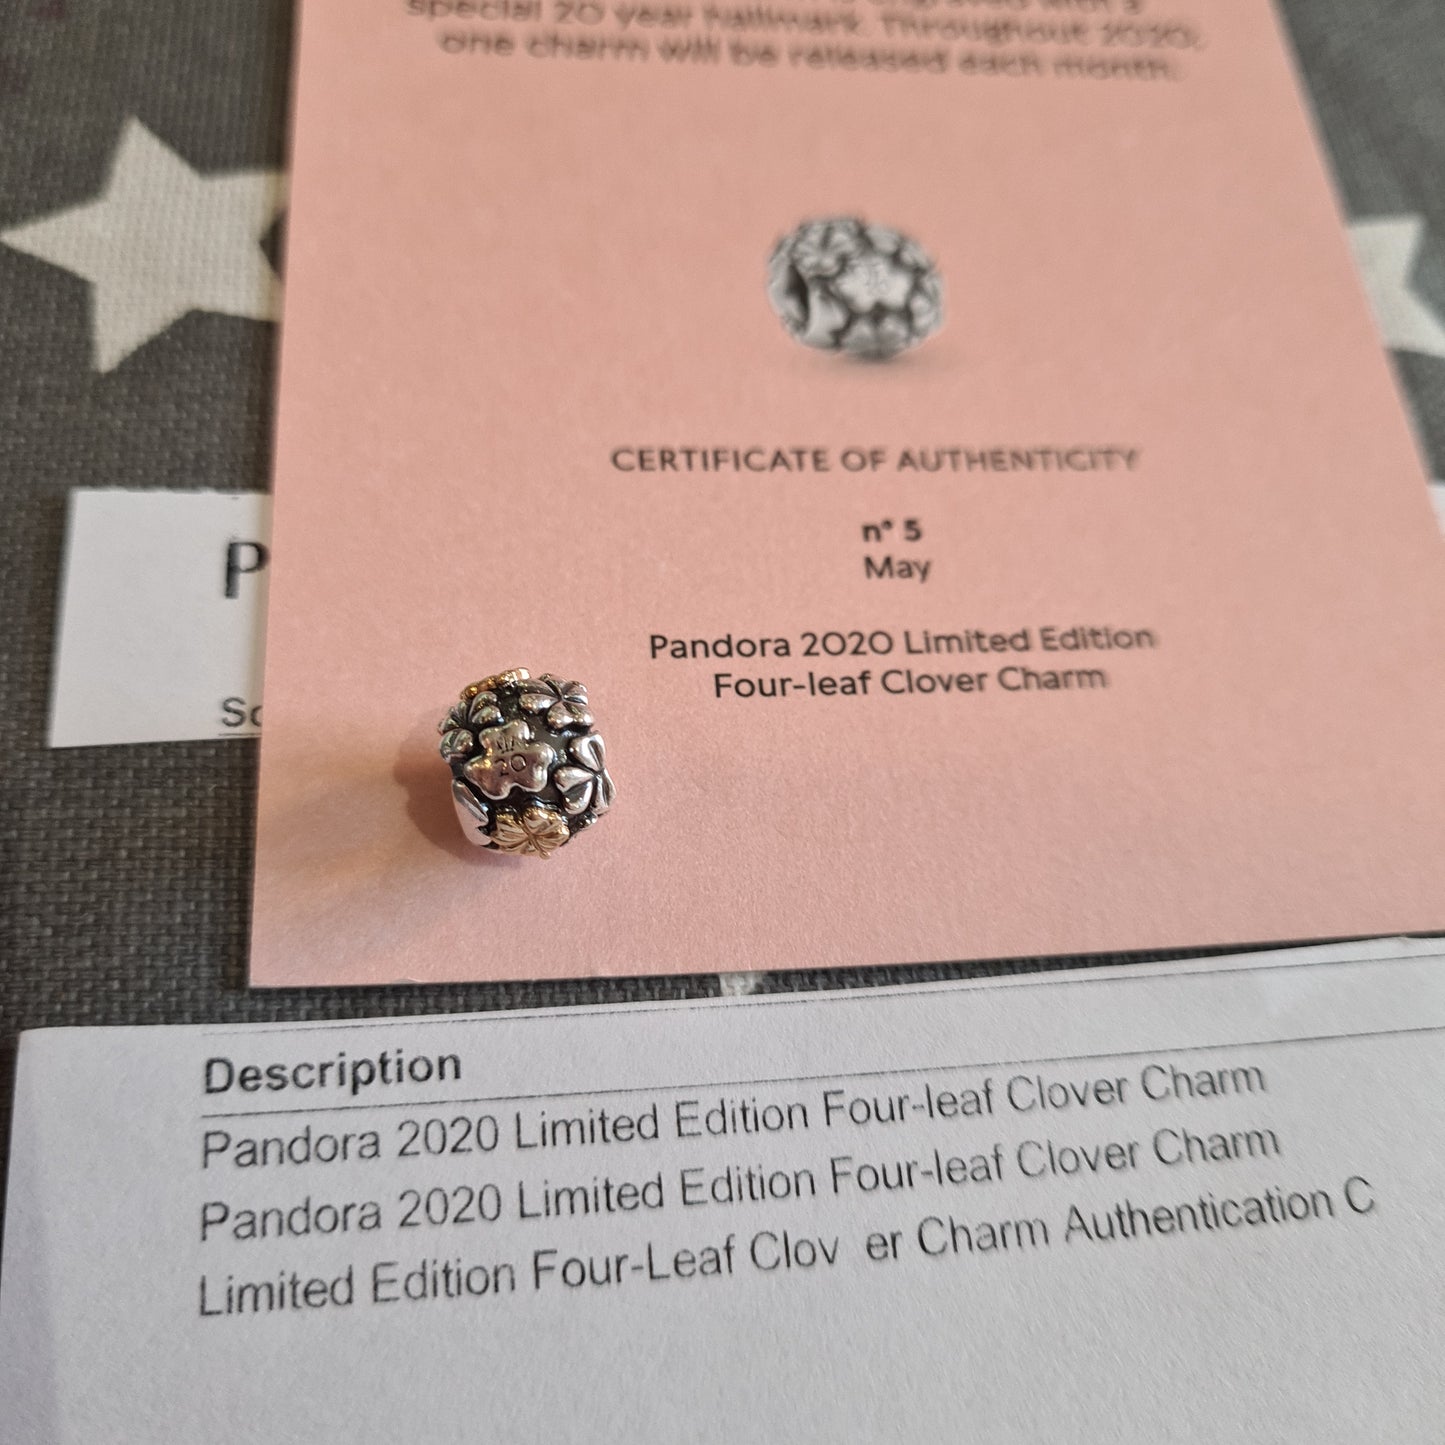 Genuine Pandora 20th Anniversary Two Tone Clover Ball With Certificate No.5 May